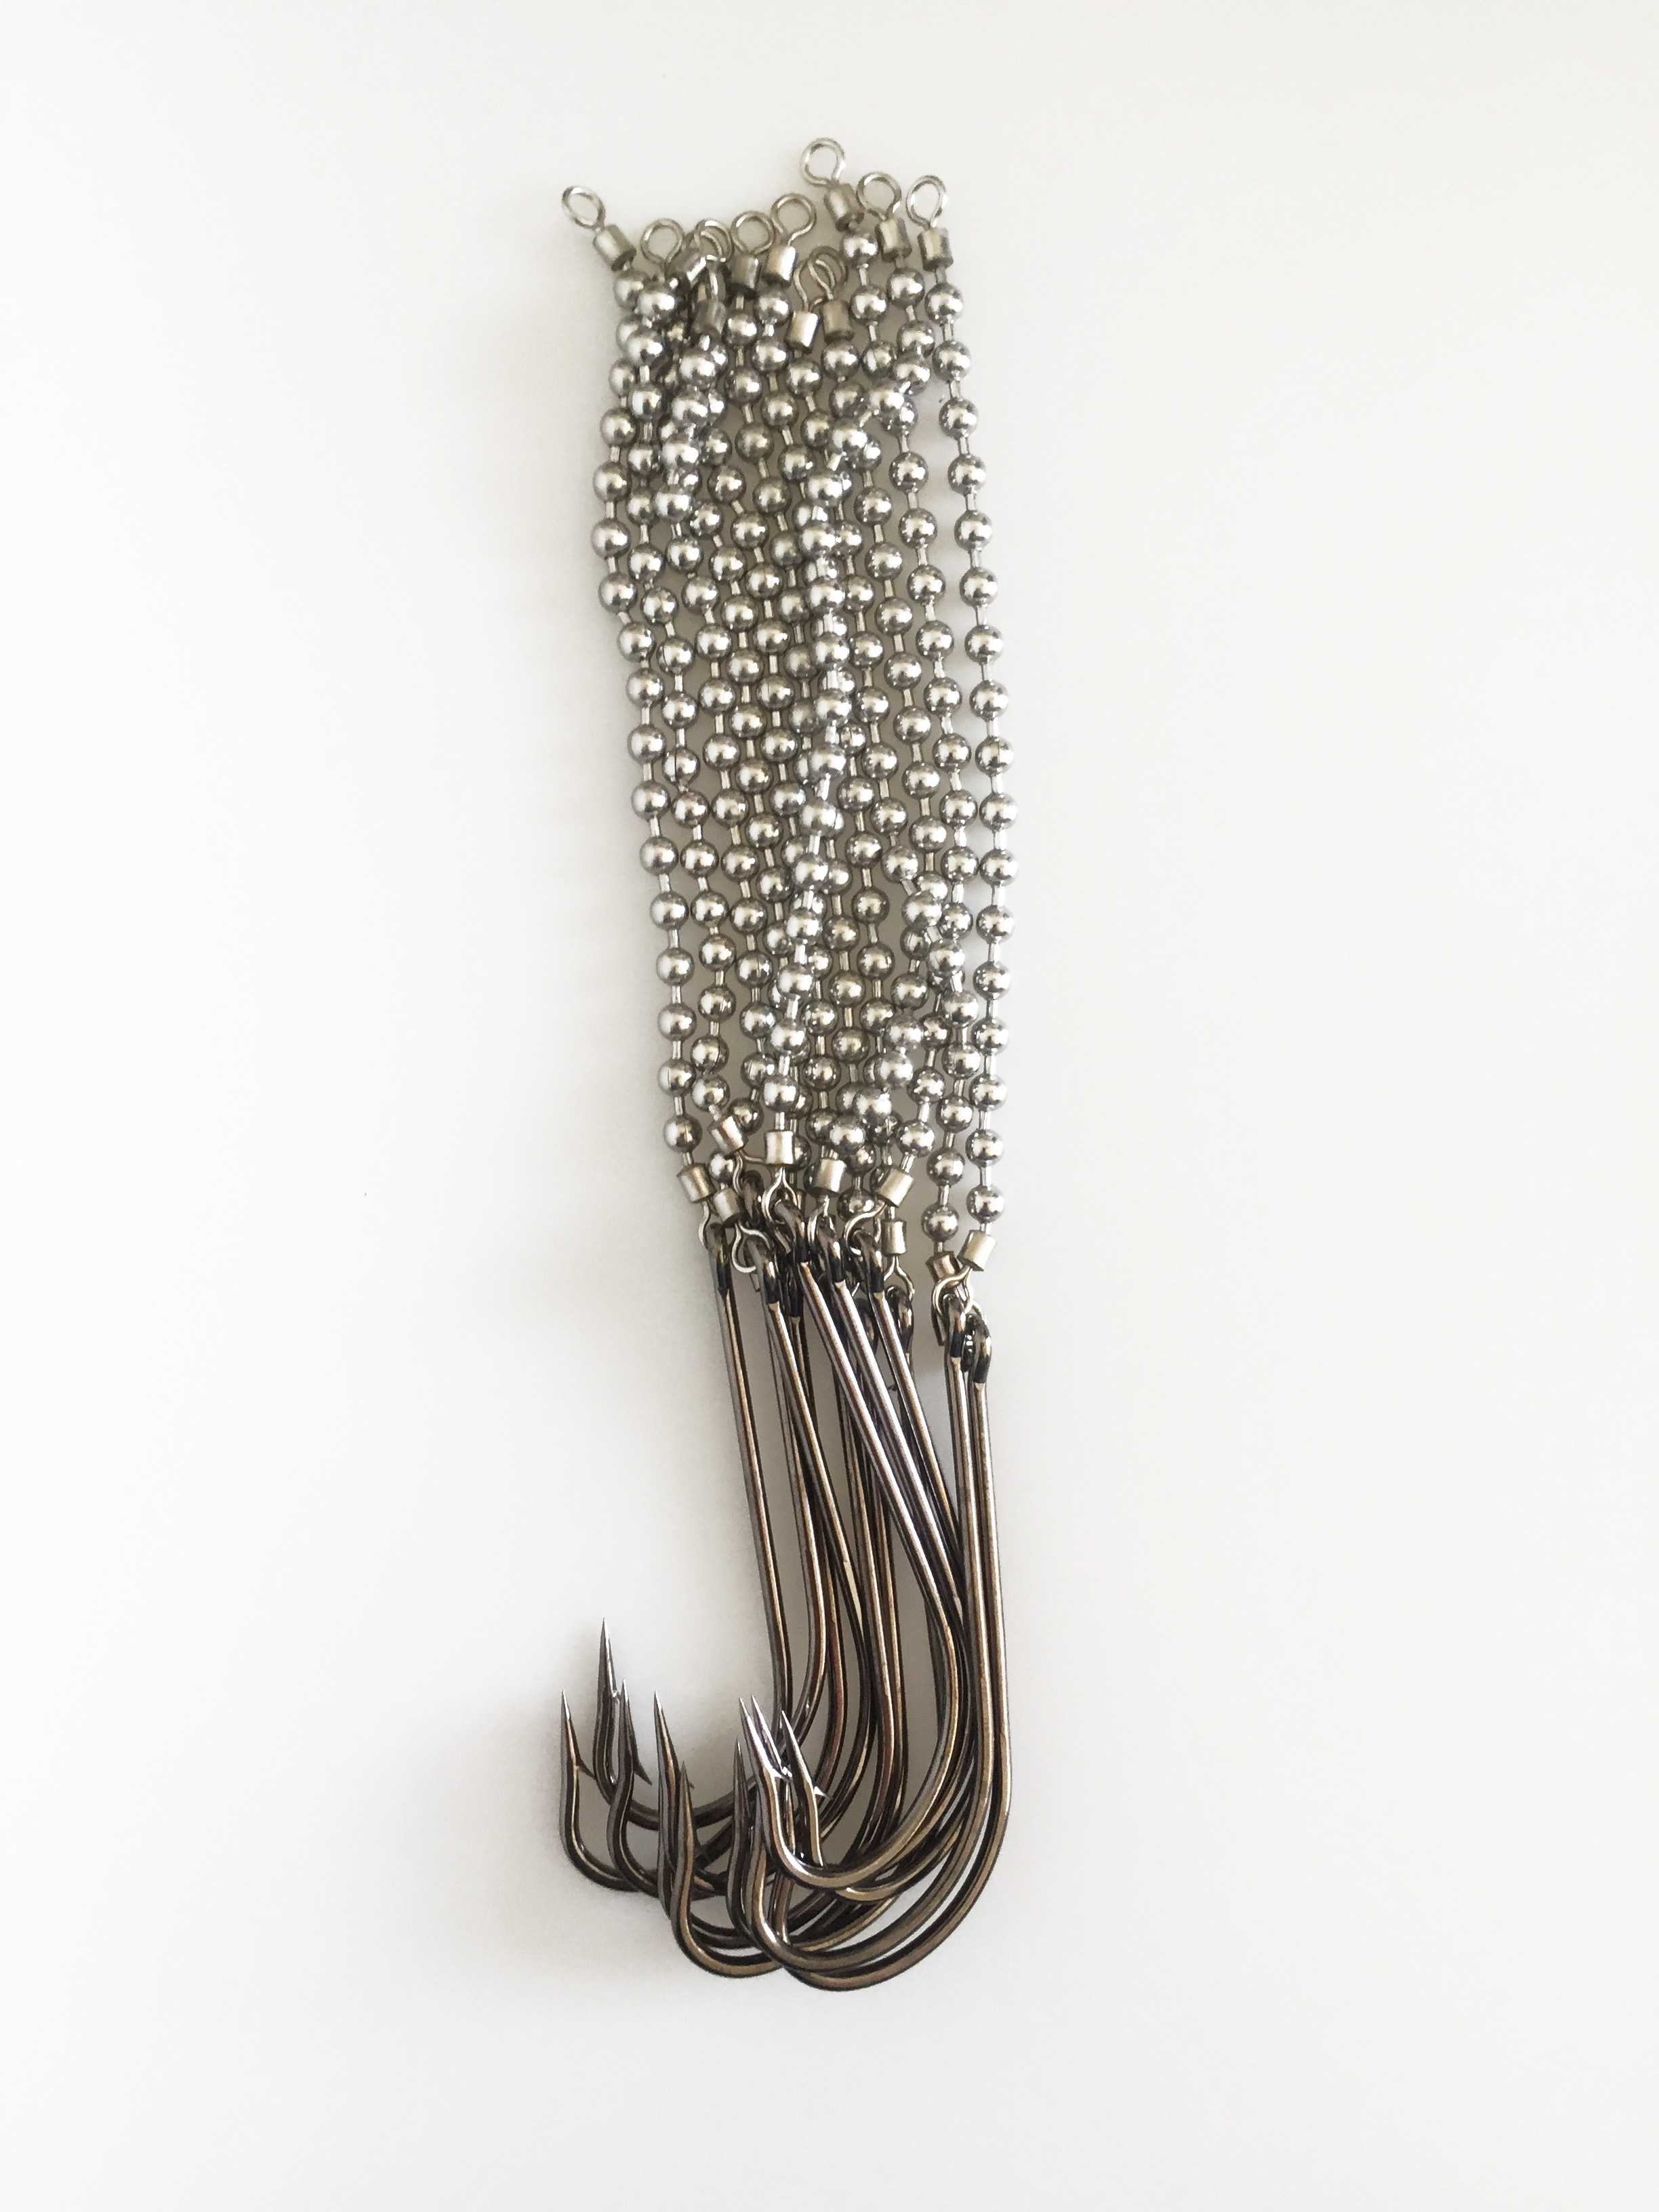 Bead chain rigs sold at the online shop with high end fishing clothes brands